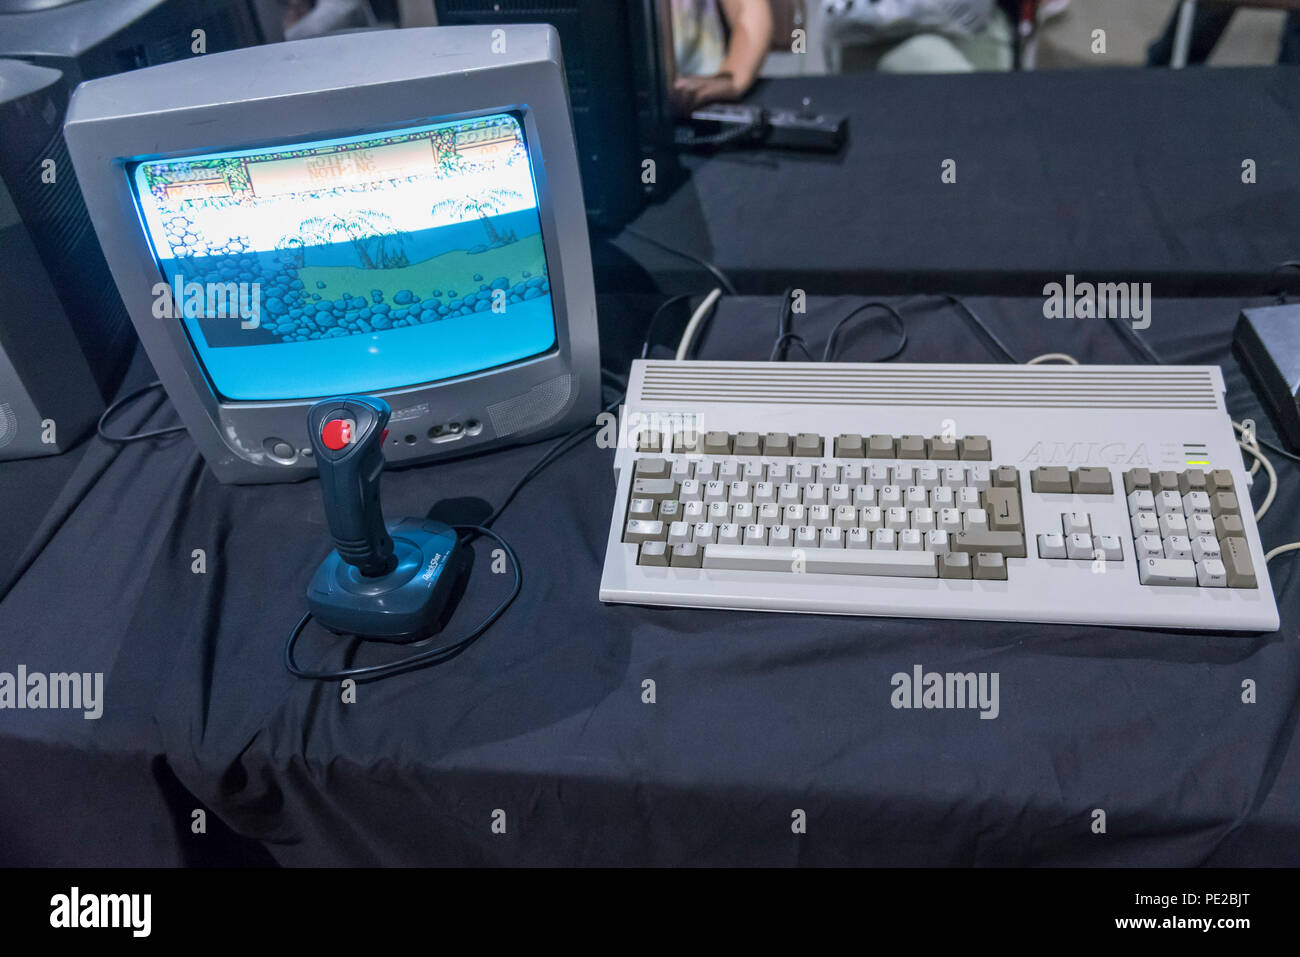 London, UK.  12 August 2018. A Commodore Amiga computer console at retro games festival PLAY Expo held in London for the first time at Printworks, Canada Water. Game enthusiasts visited to rediscover the classics, from Donkey Kong, Pong, Super Mario Bros. and Space Invaders to vintage pinball machines, VR, indie games and a dedicated Minecraft zone. The show also included a sneak preview of new retro gaming streaming service, Antstream.  Credit: Stephen Chung / Alamy Live News Stock Photo